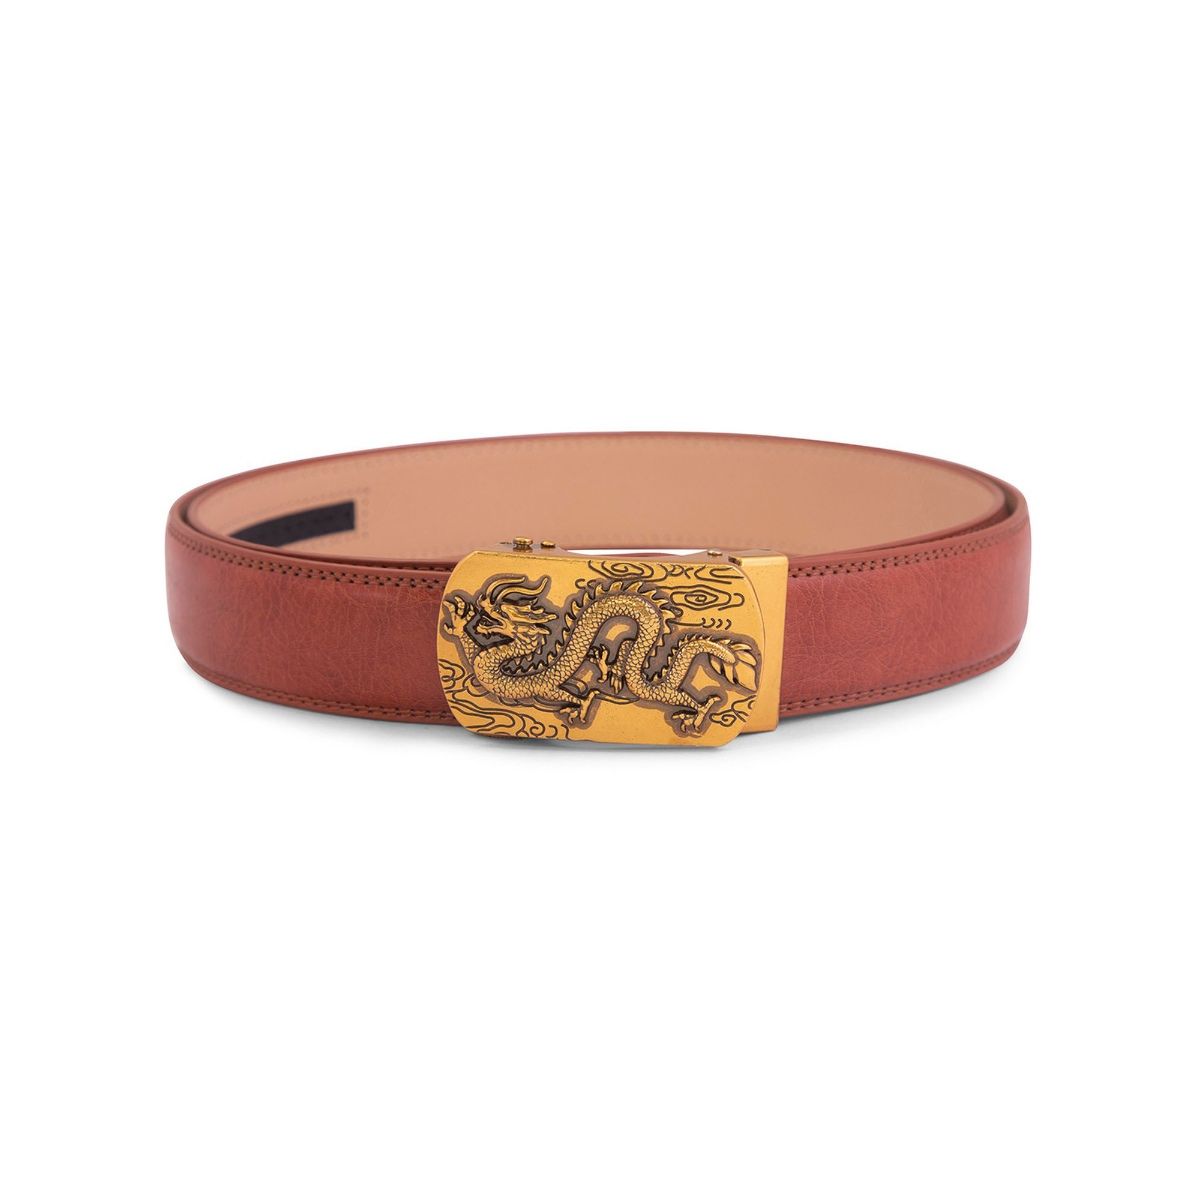 BANGE Mens Genuine Leather Belt With Flying Dragon Design Bronze Buckle  (32): Buy BANGE Mens Genuine Leather Belt With Flying Dragon Design Bronze  Buckle (32) Online at Best Price in India | Nykaa